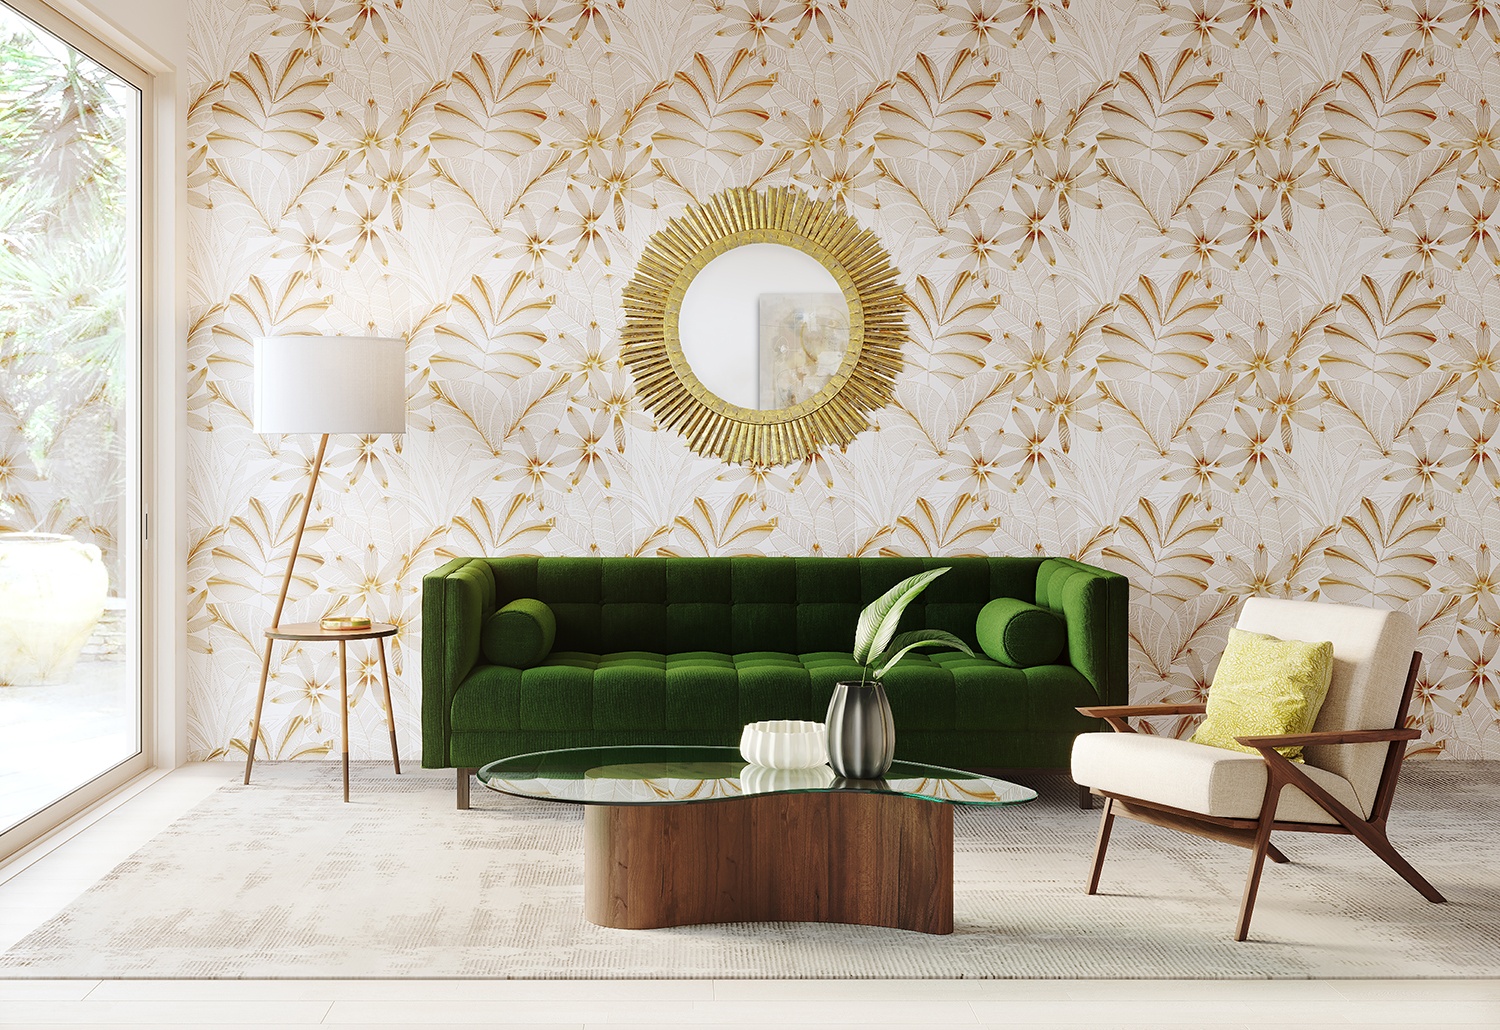 New Spring Wallpaper That Will Add Tropical Flair To Your Home